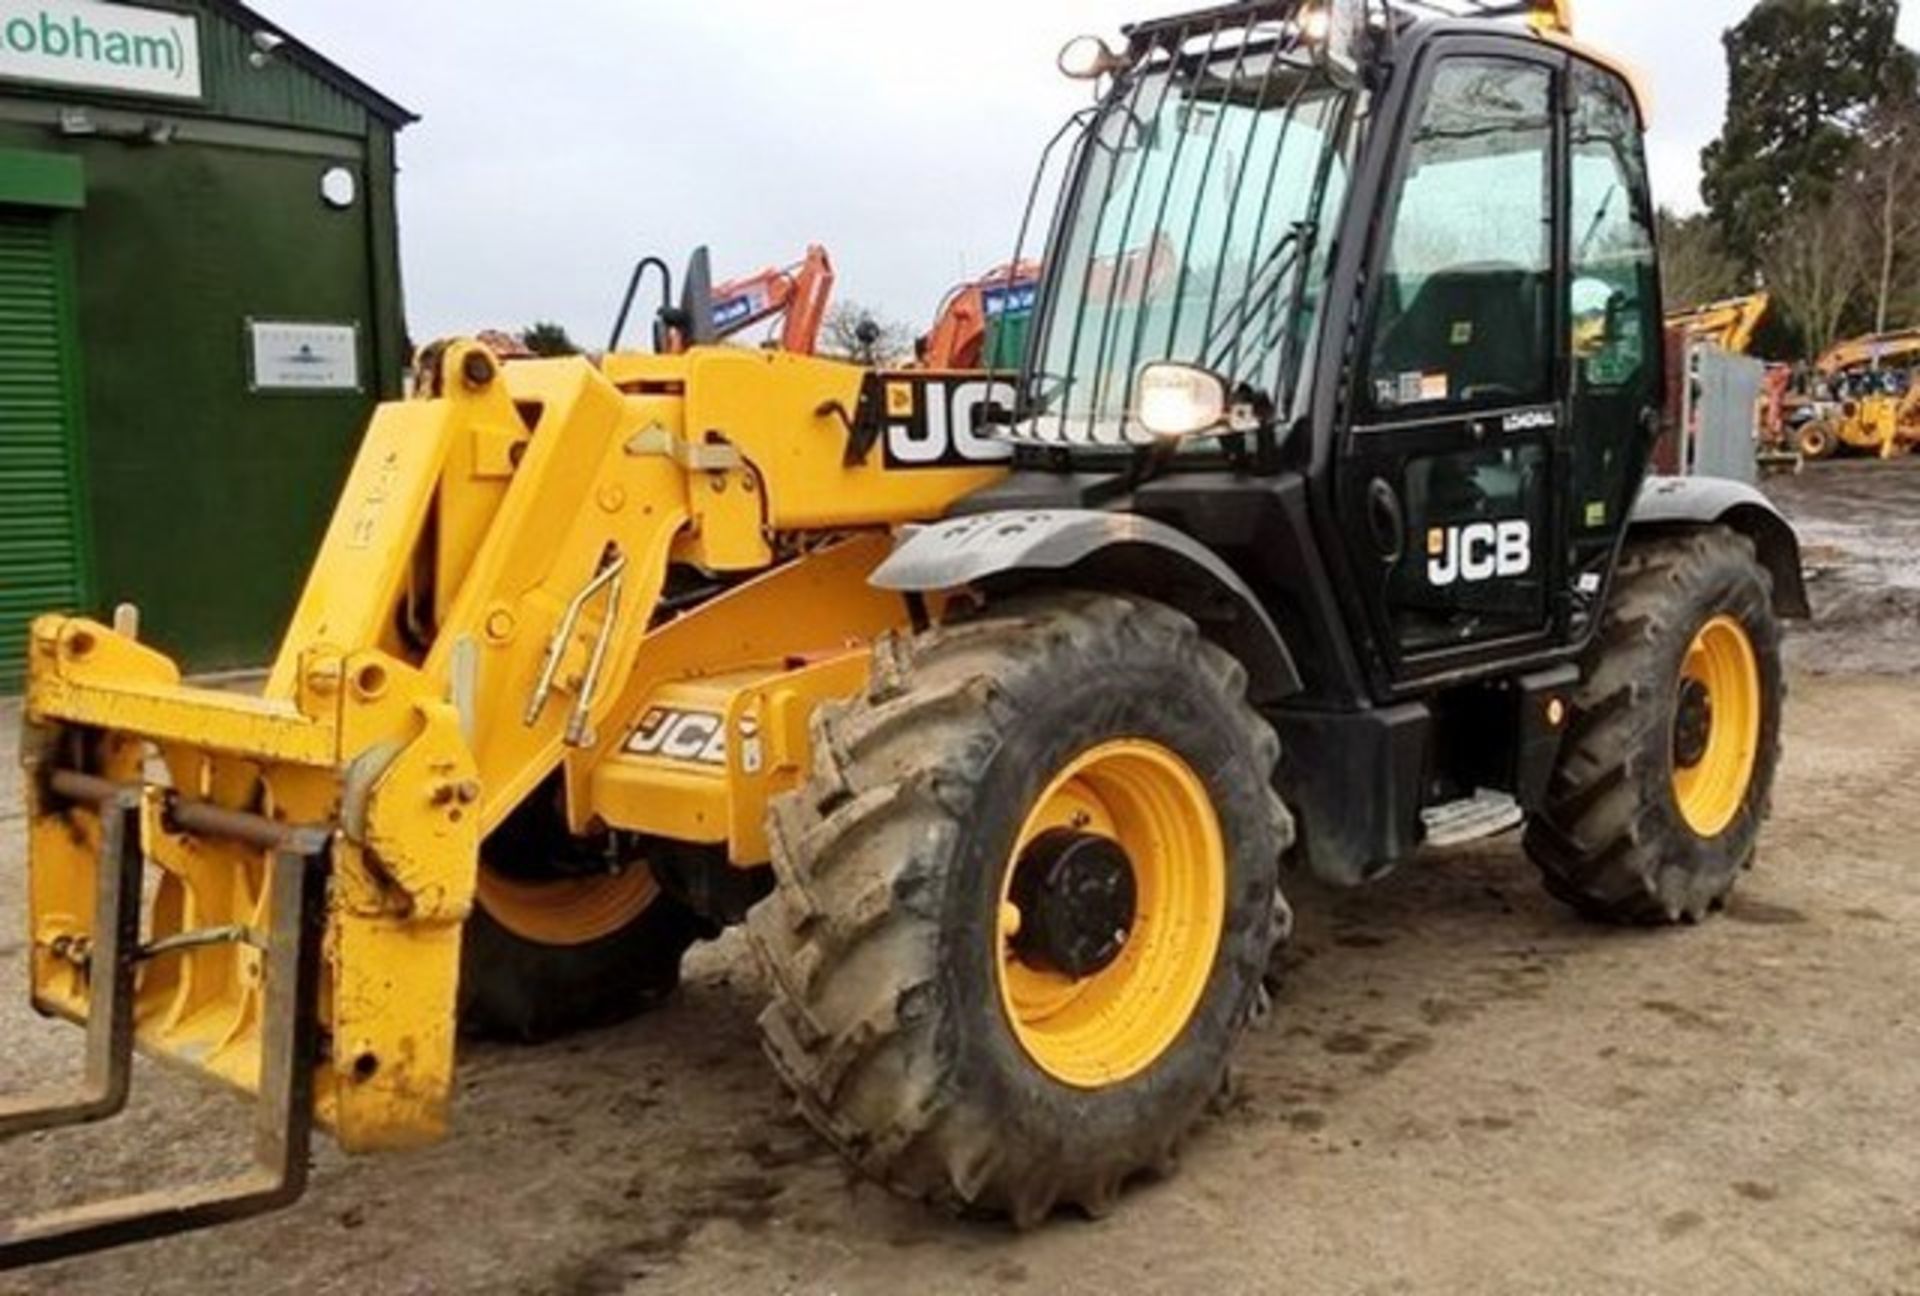 2014 JCB 531-70 TELEHANDLER, SN 2181521, 1399 HOURS, AUX PIPE WORK, MANUAL QUICK HITCH, 60% TYRE